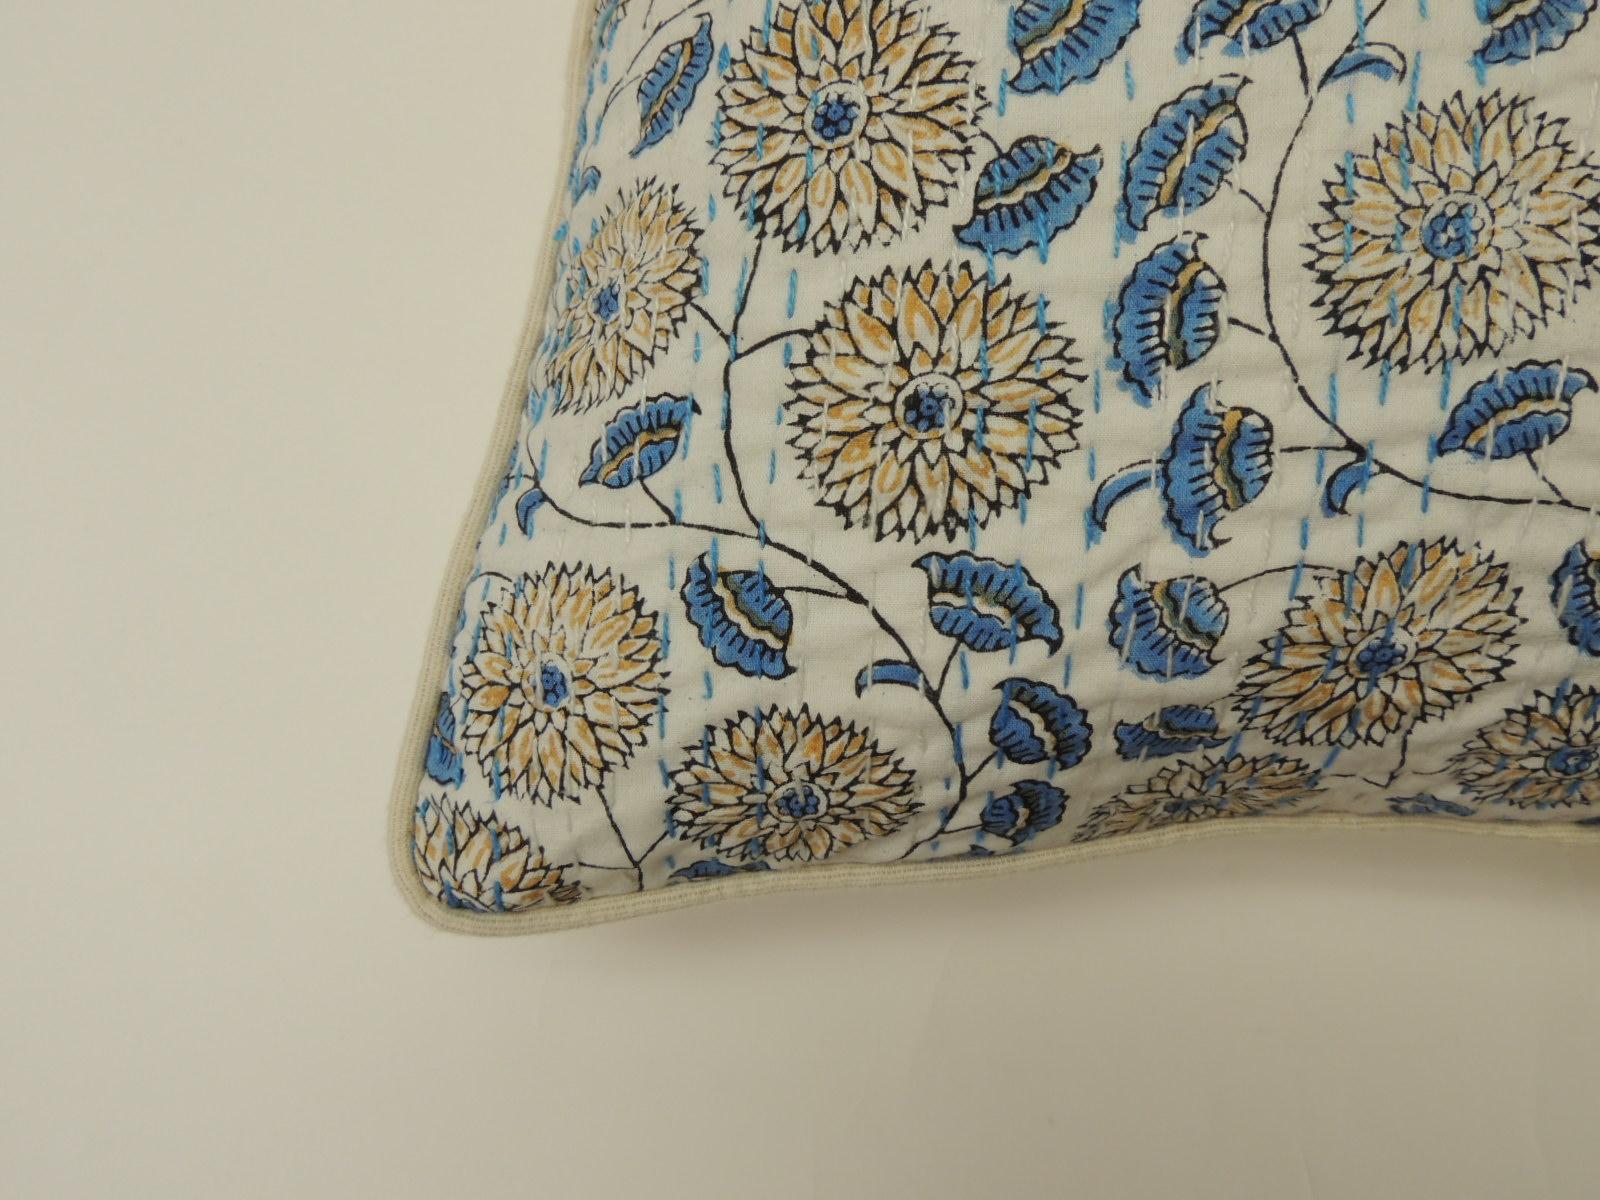 Pair of Indian quilted lotus in blue and yellow decorative pillows.
Vintage floral hand quilted Indian pillow in yellow, blue and natural. Natural linen backing and piping.
The price on the pillow includes a custom ATG feather/down insert. Invisible